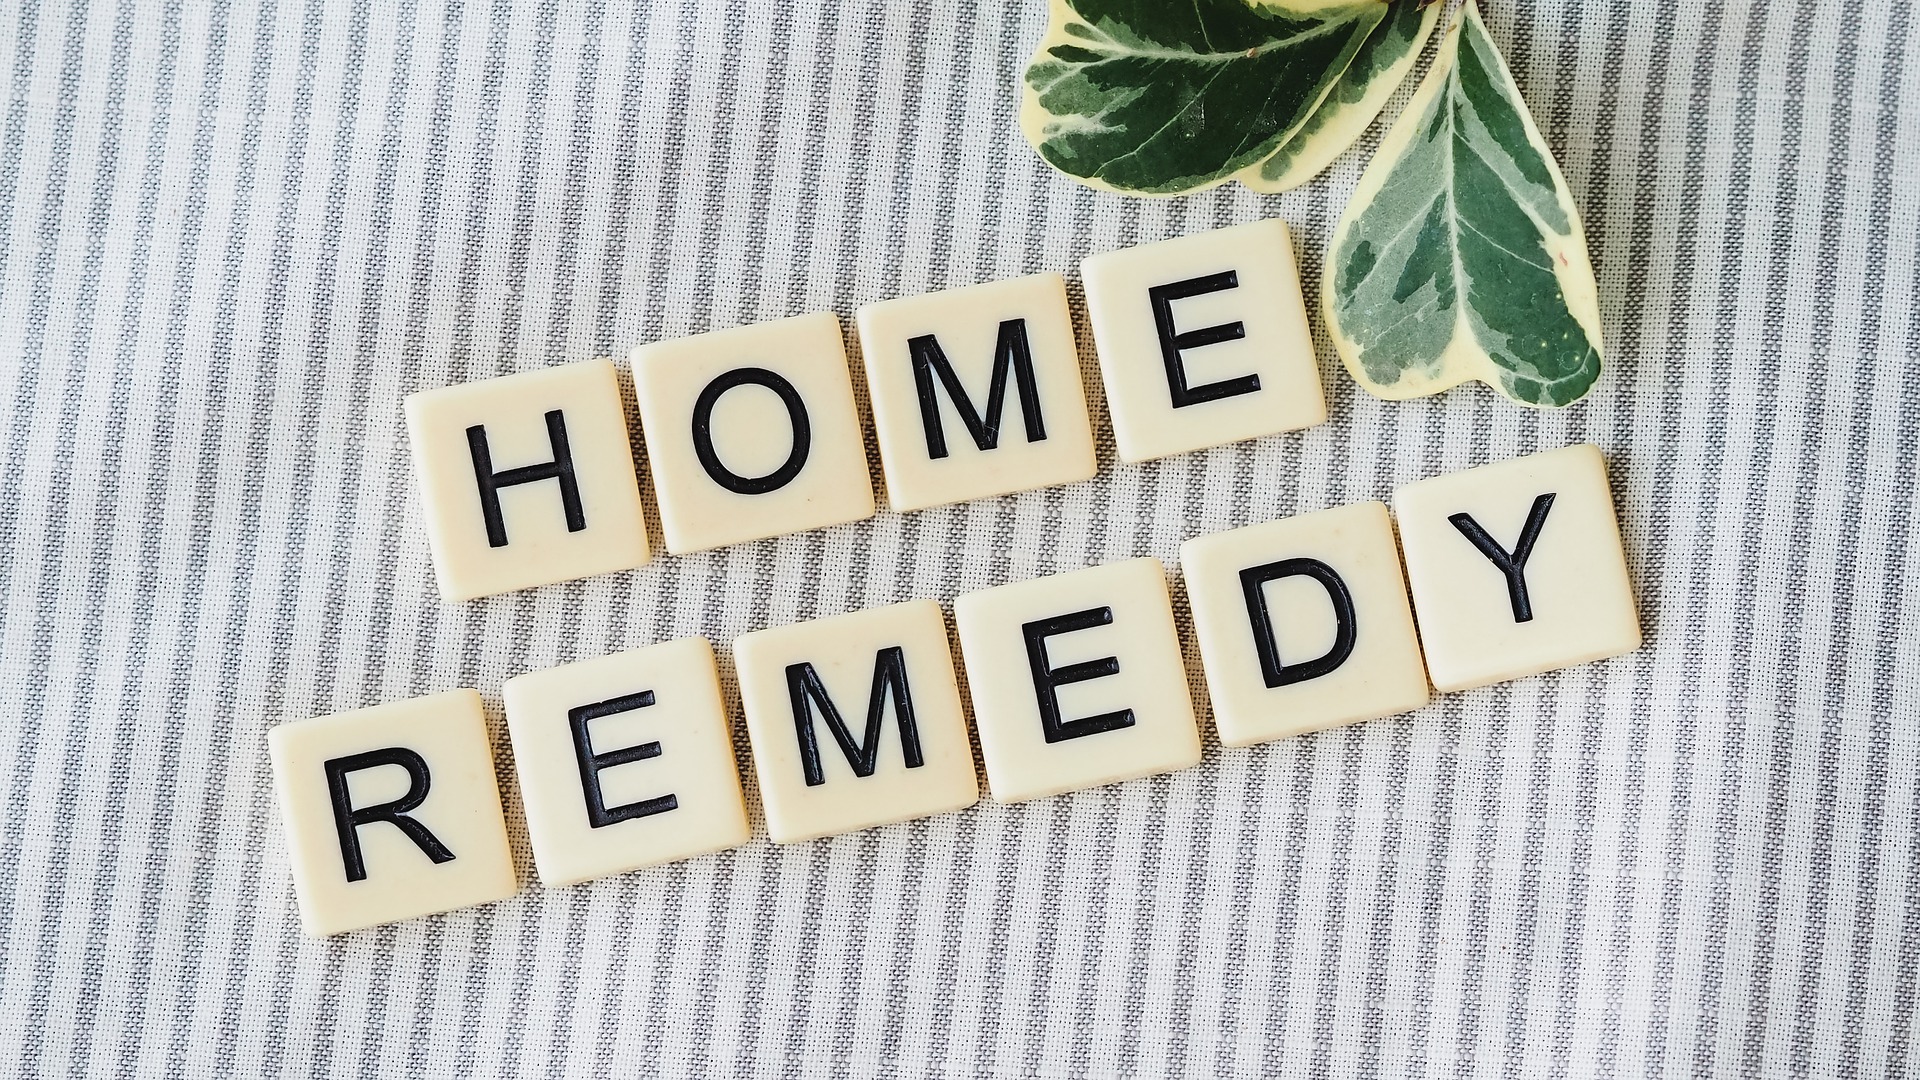 Home Remedy Spelled Out in Scrabble Pieces